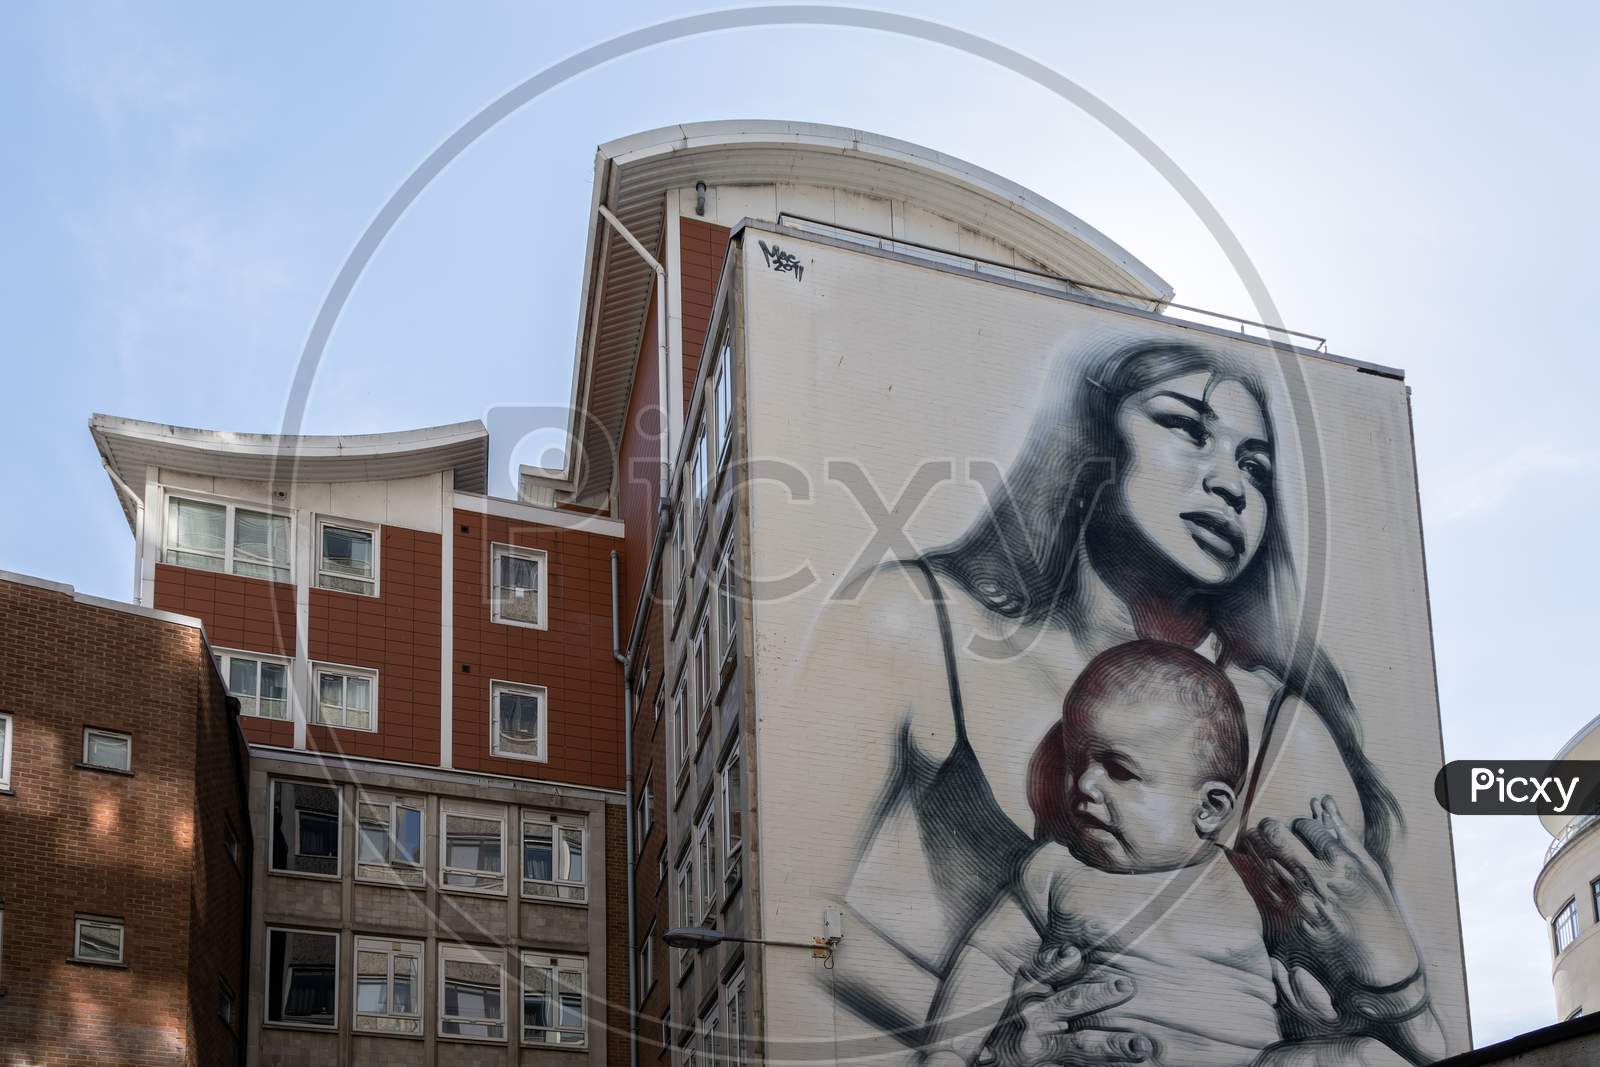 Bristol, Uk - May 14 : Woman And Baby Portrait Graffiti On A Wall  In Bristol On May 14, 2019